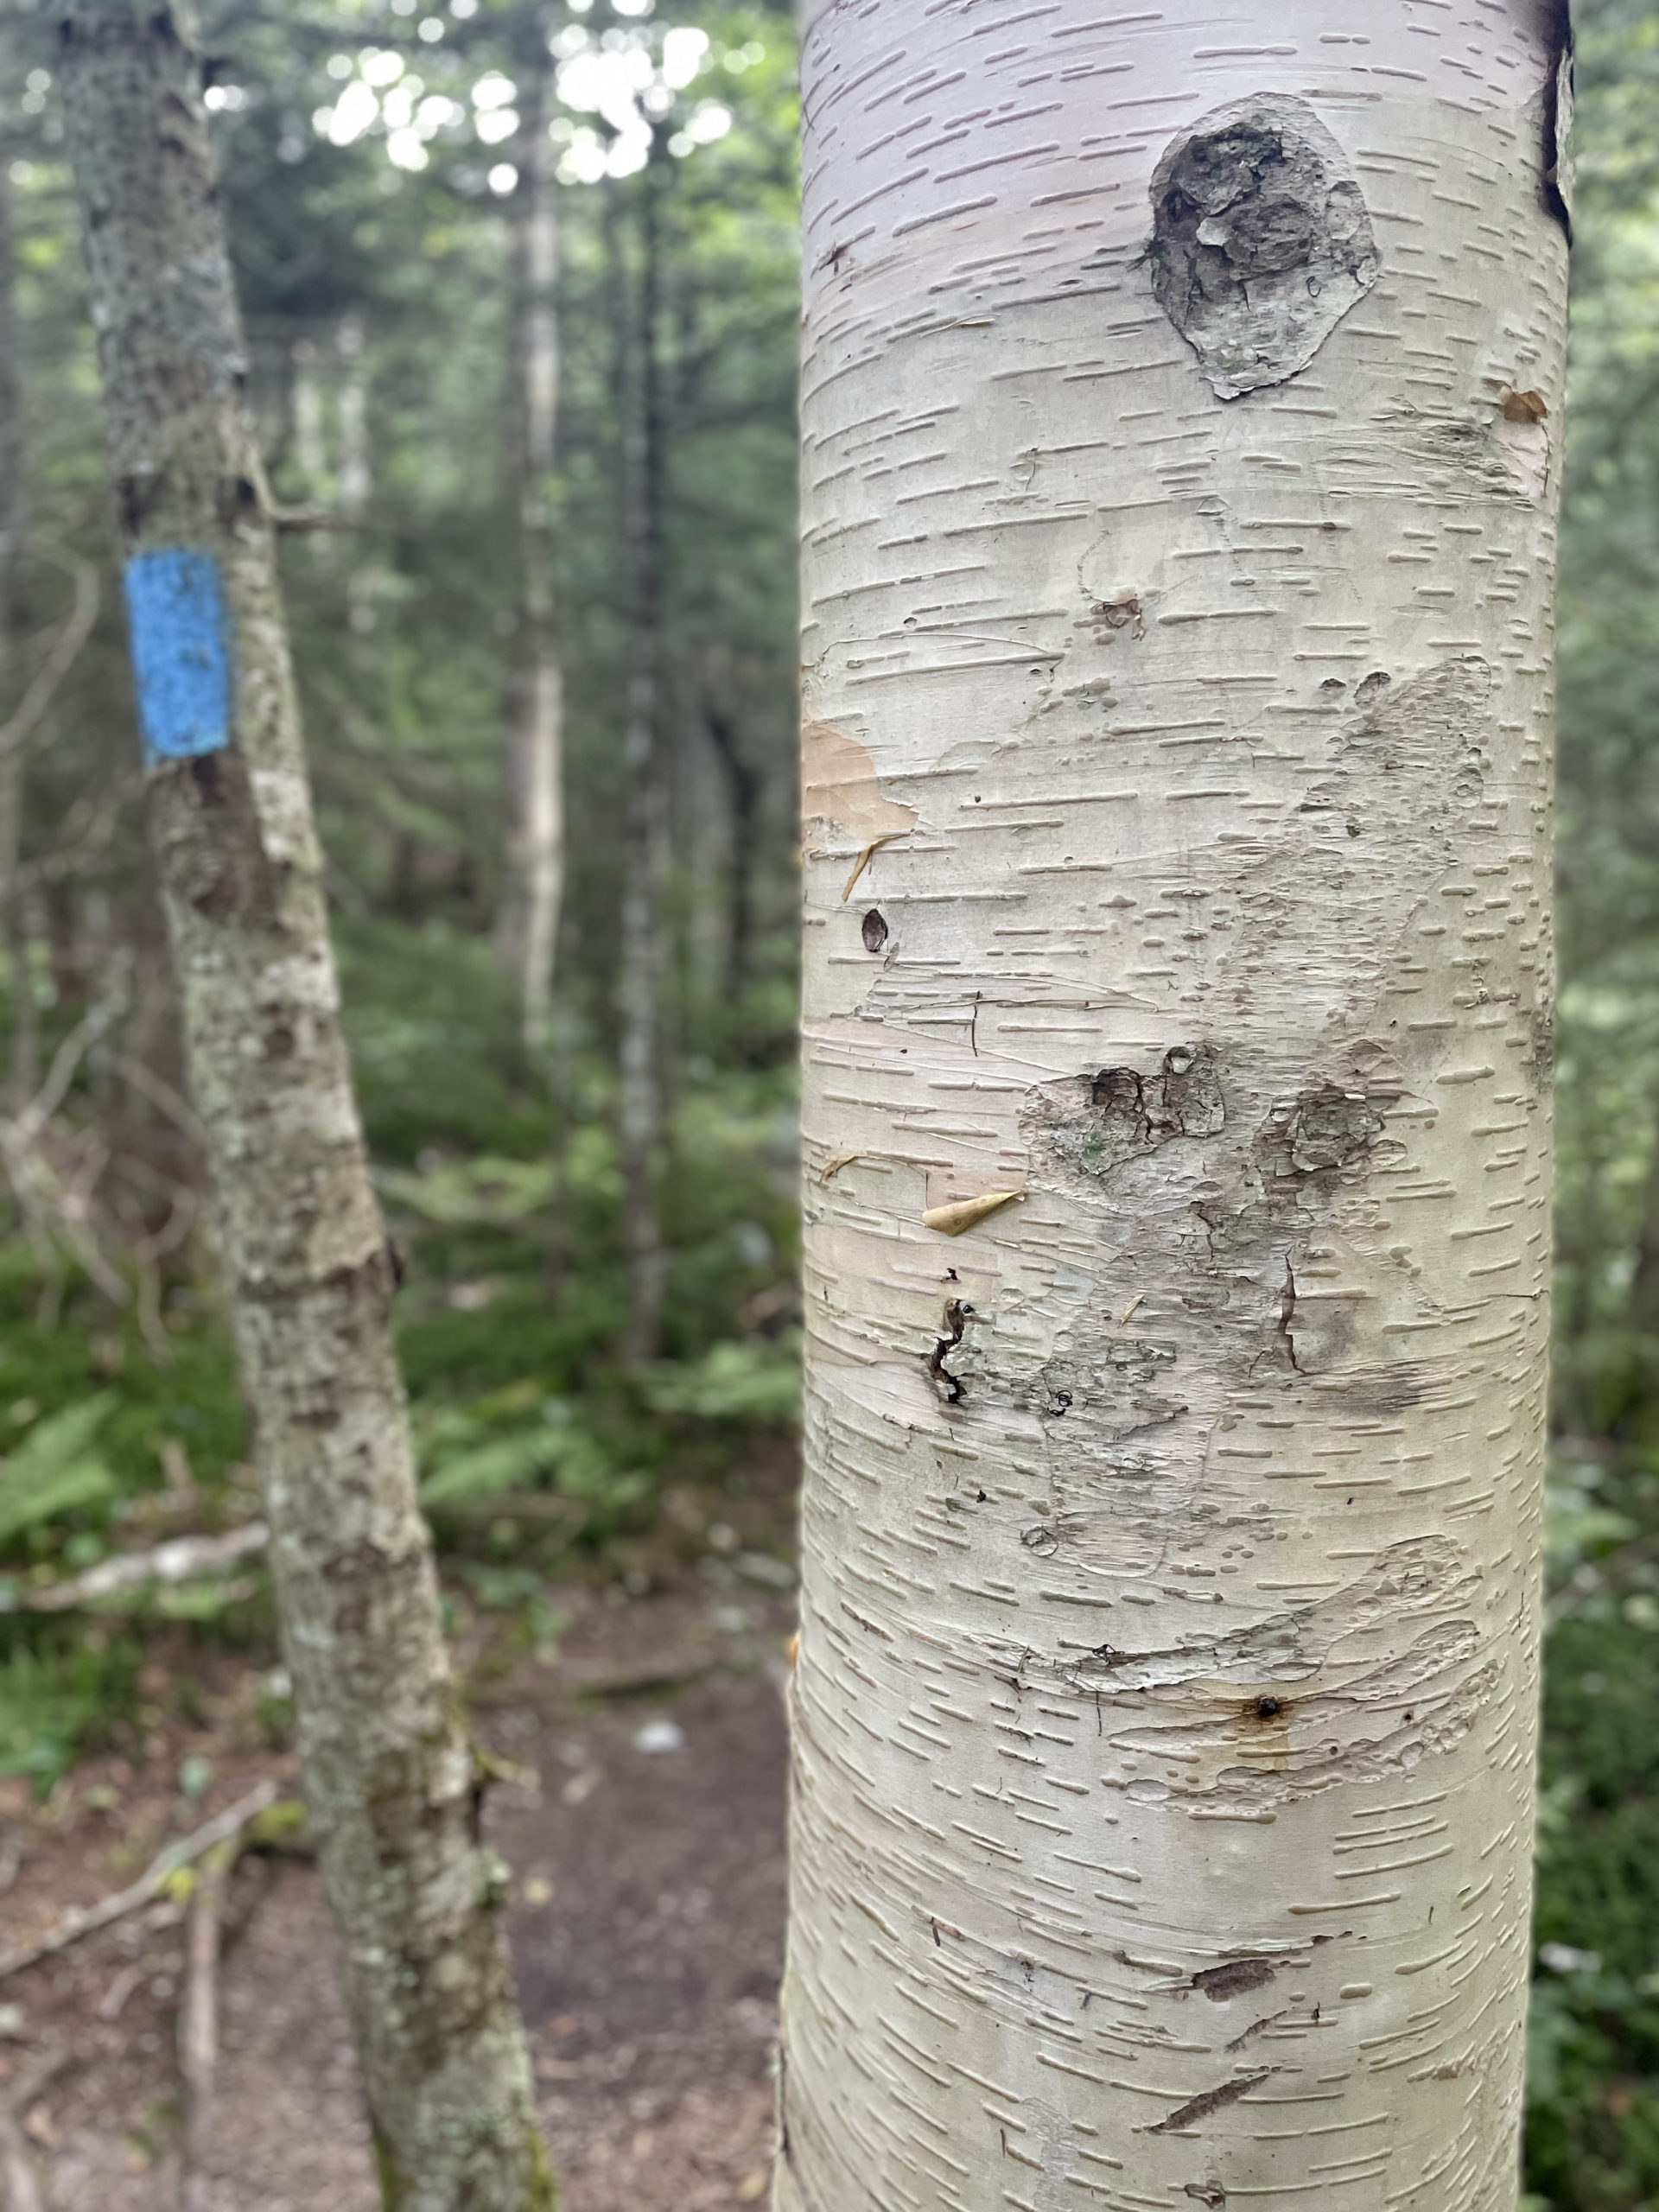 Birch tree and a blue blaze, seen while hiking Mt. Mansfield in the Green Mountains, Vermont